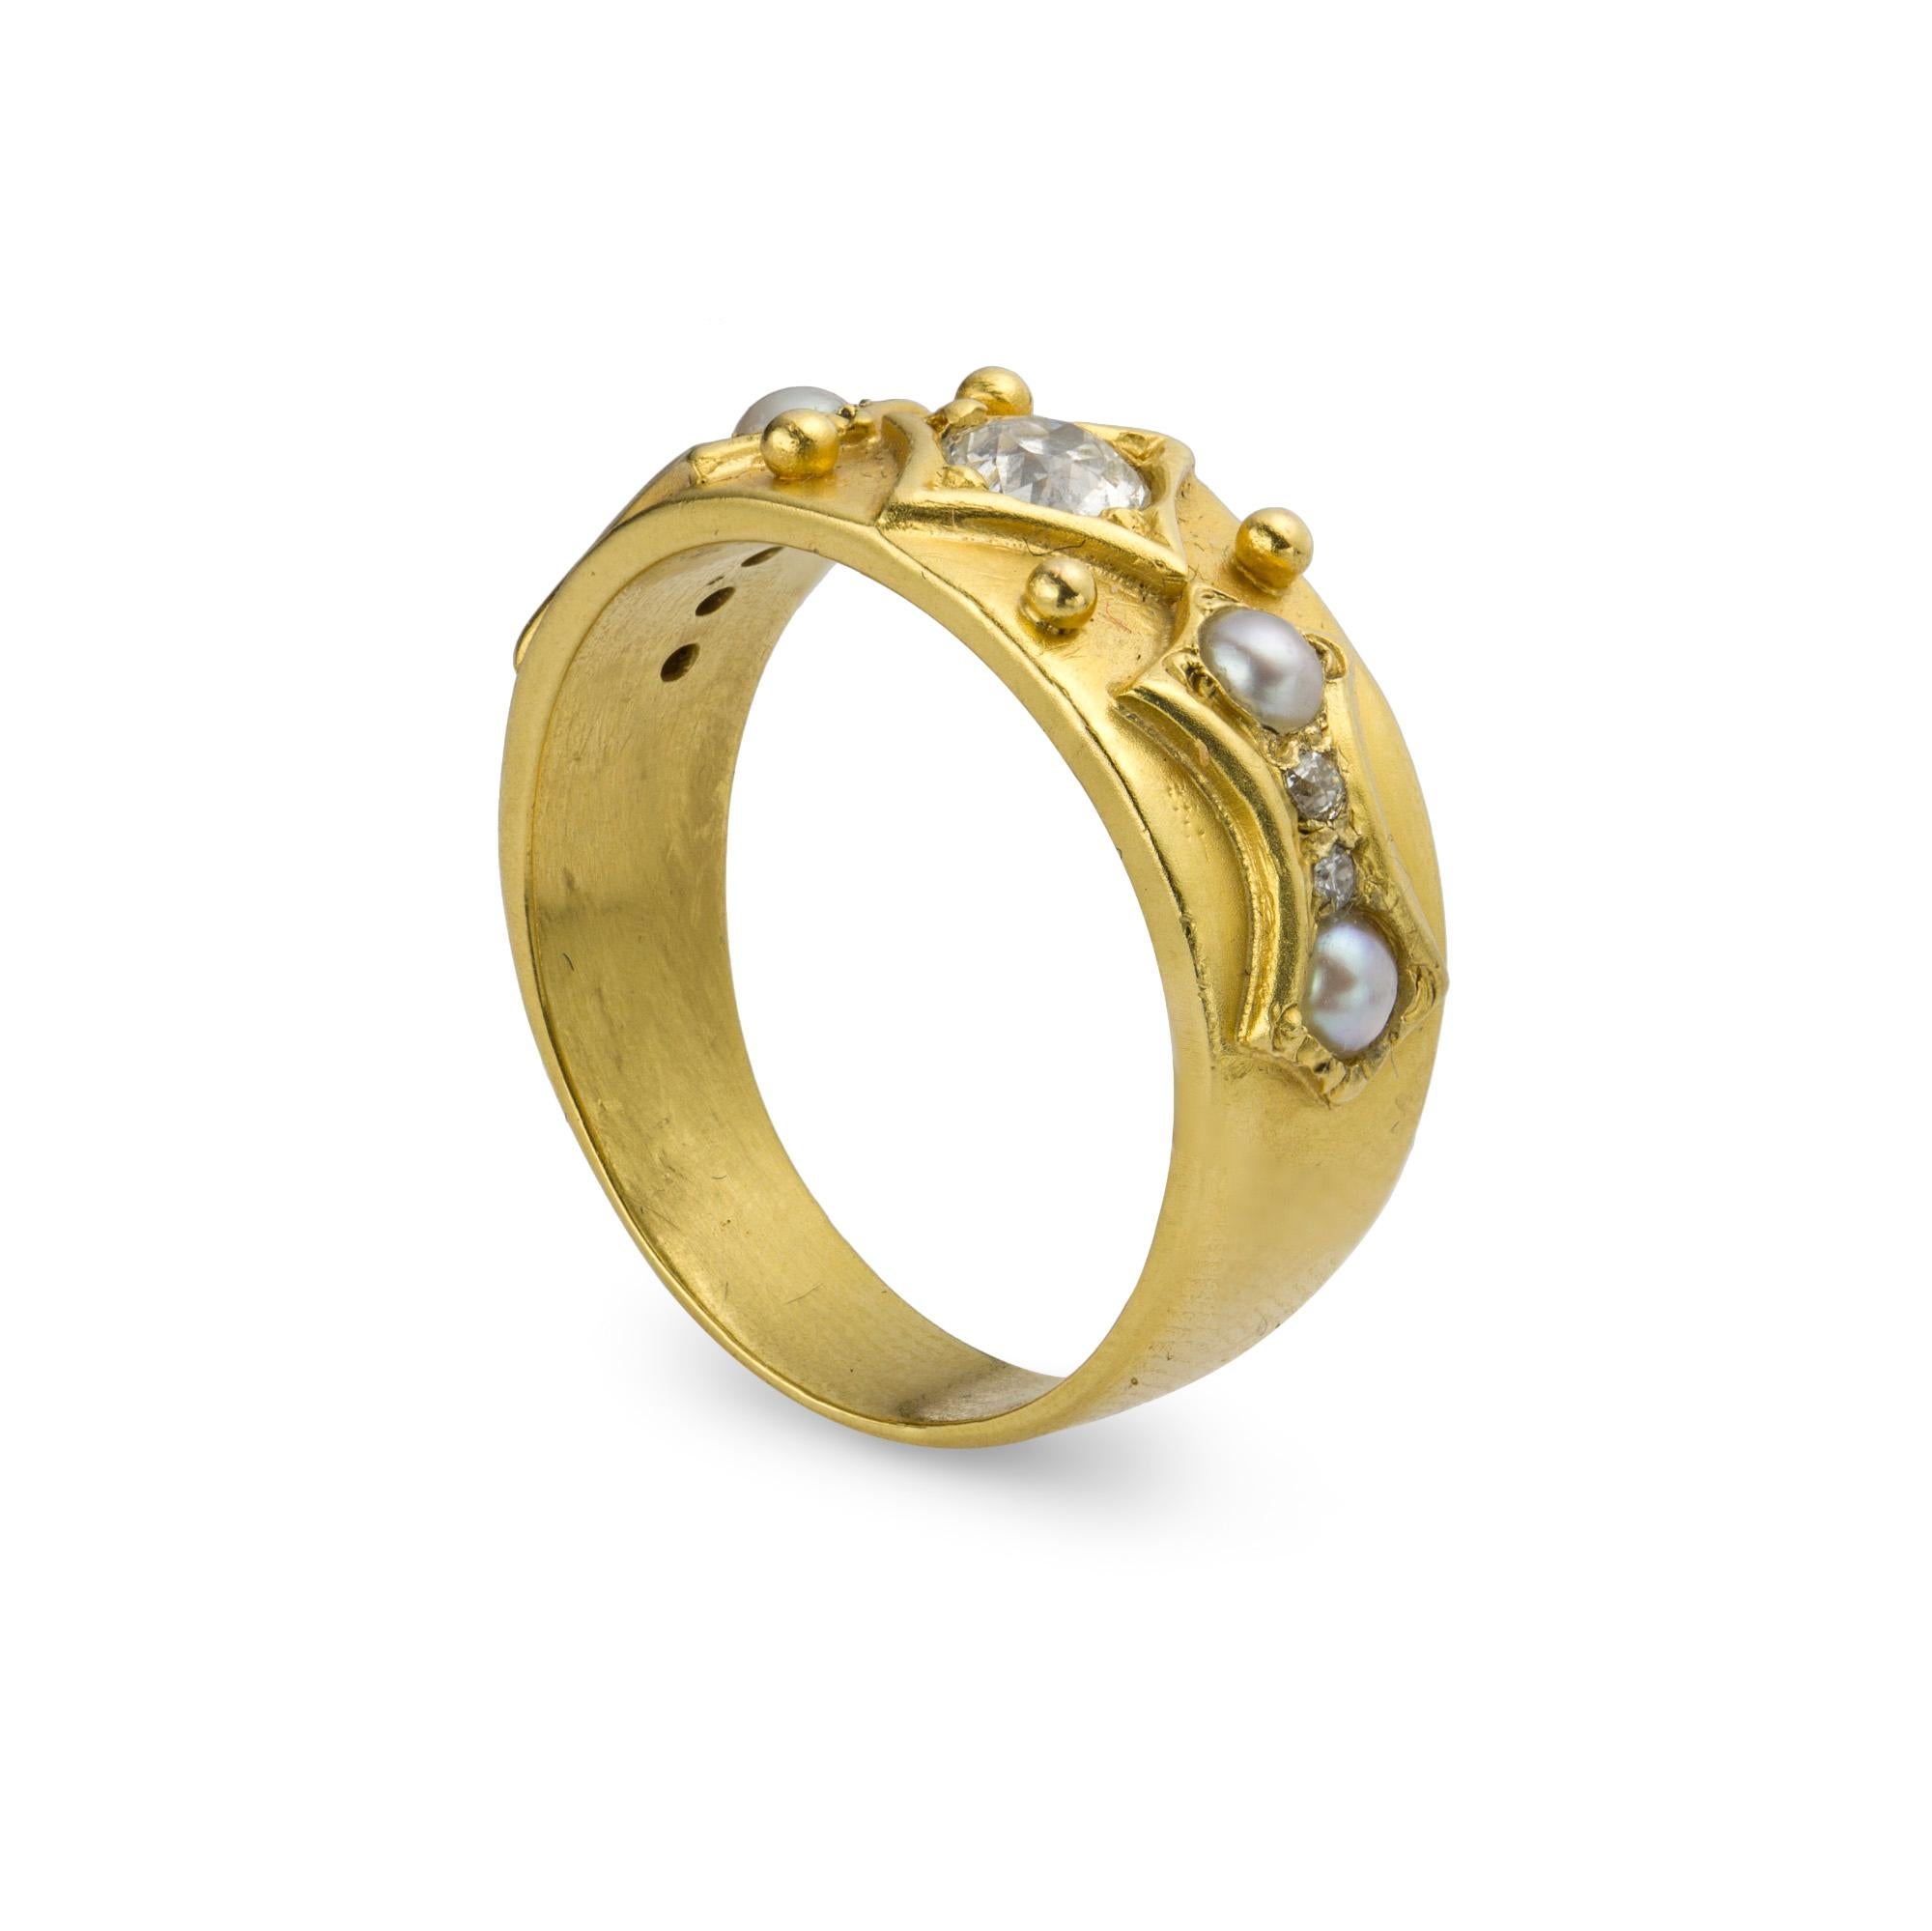 Brilliant Cut Victorian Diamond and Pearl Yellow Gold Ring